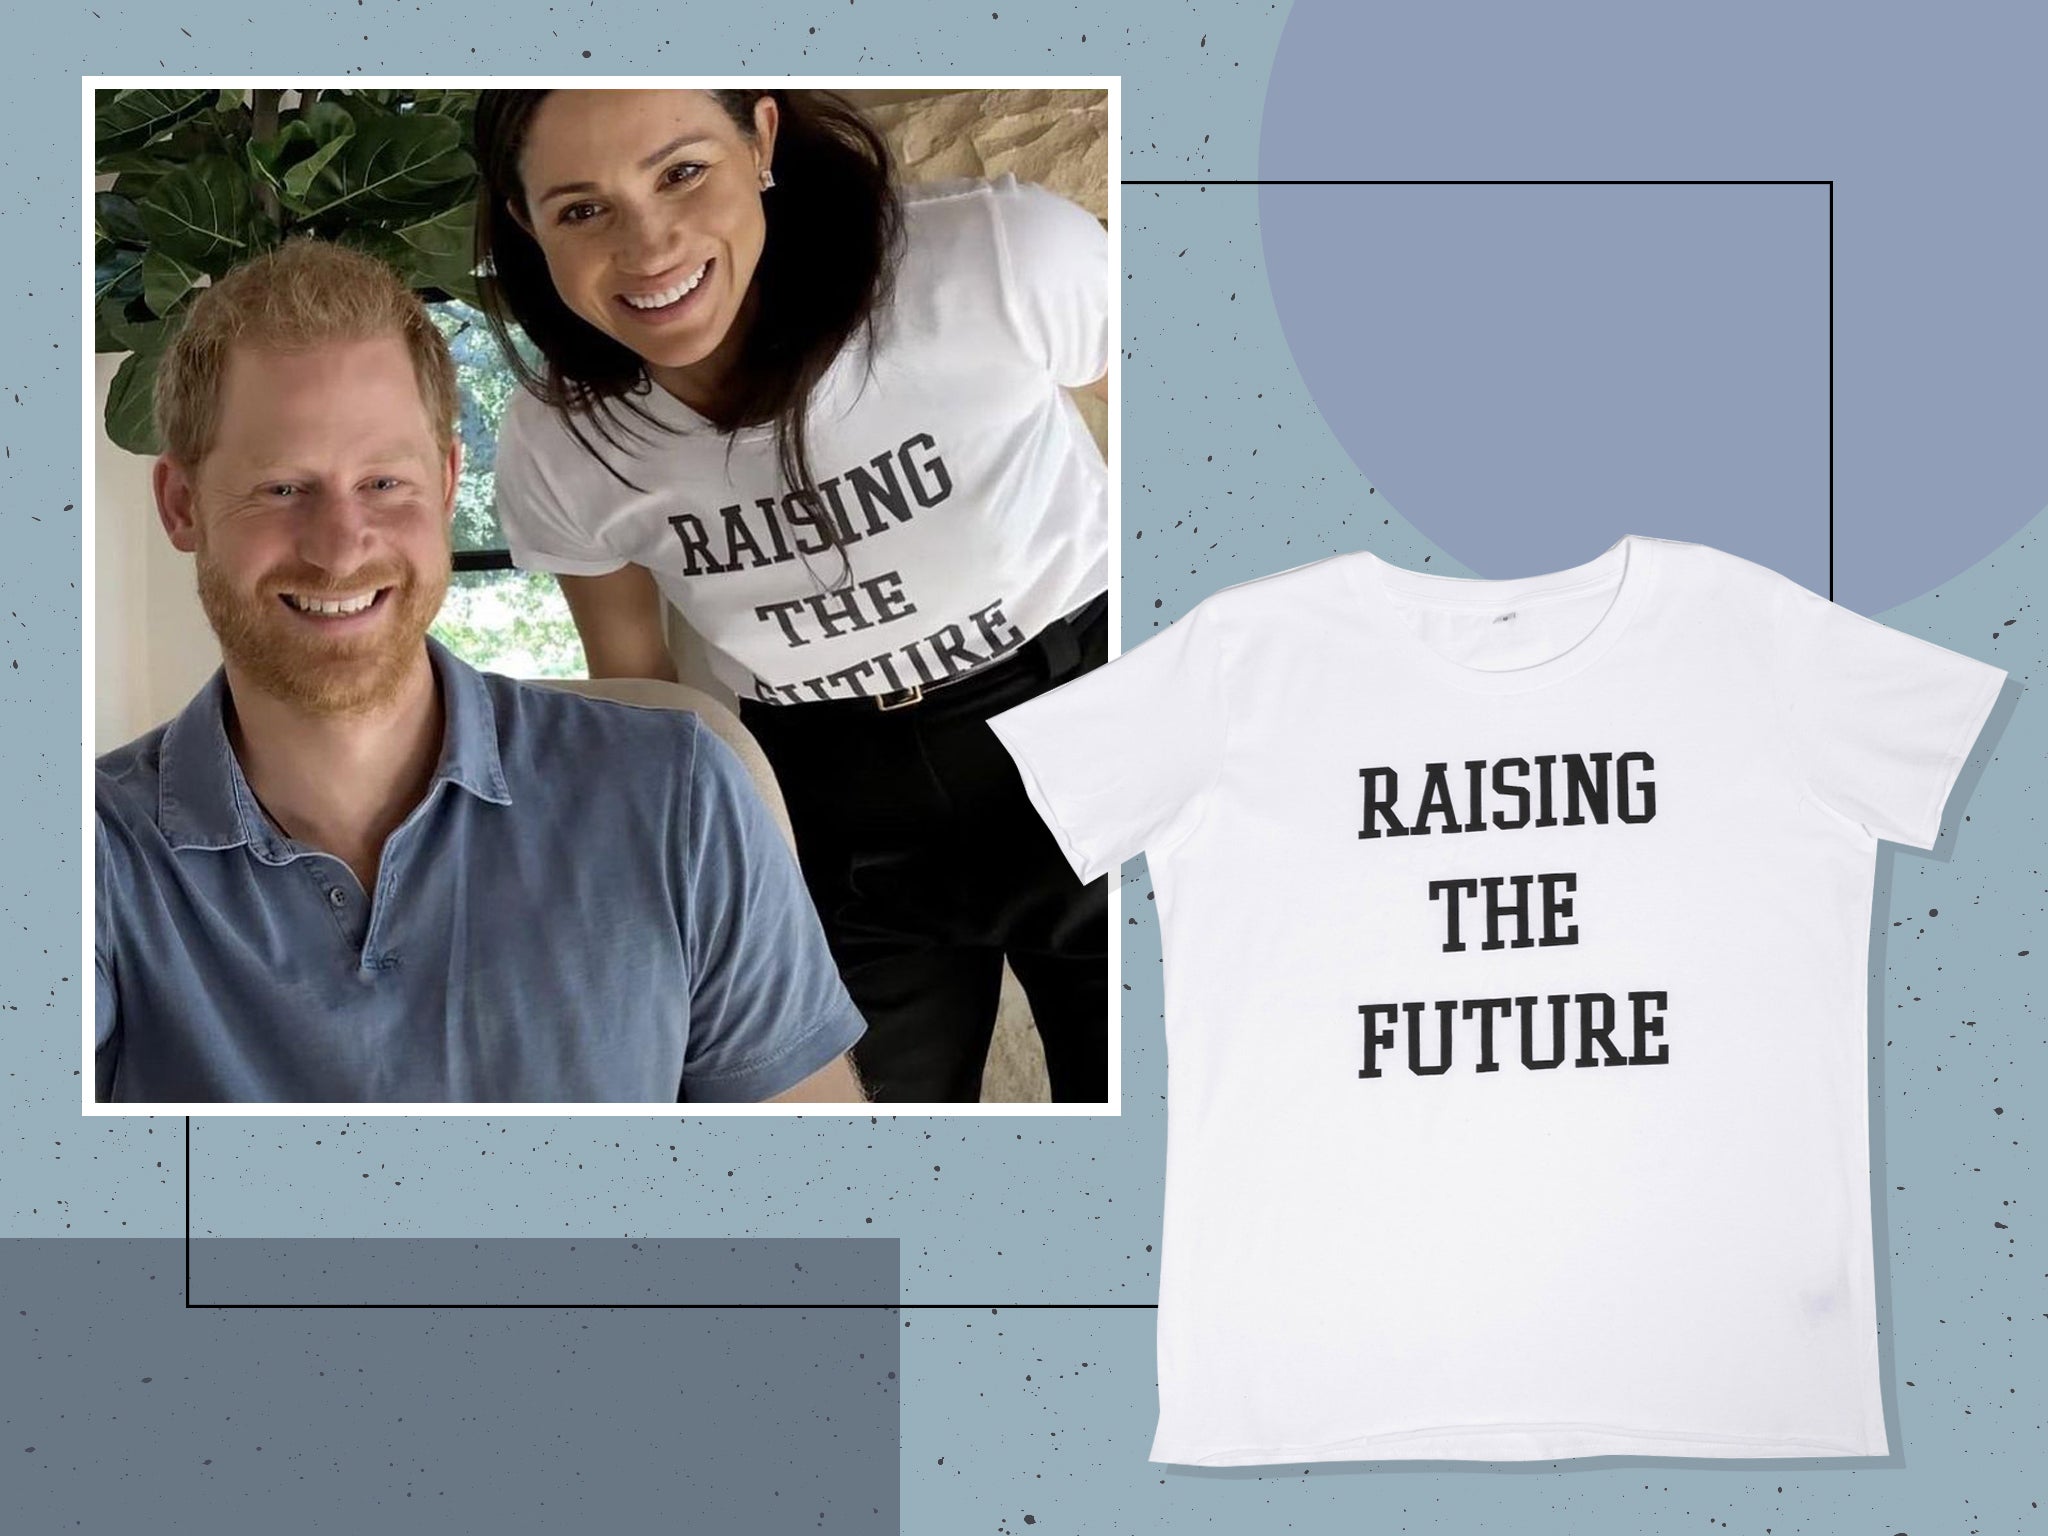 Get your hands on the royal’s tee before it sells out